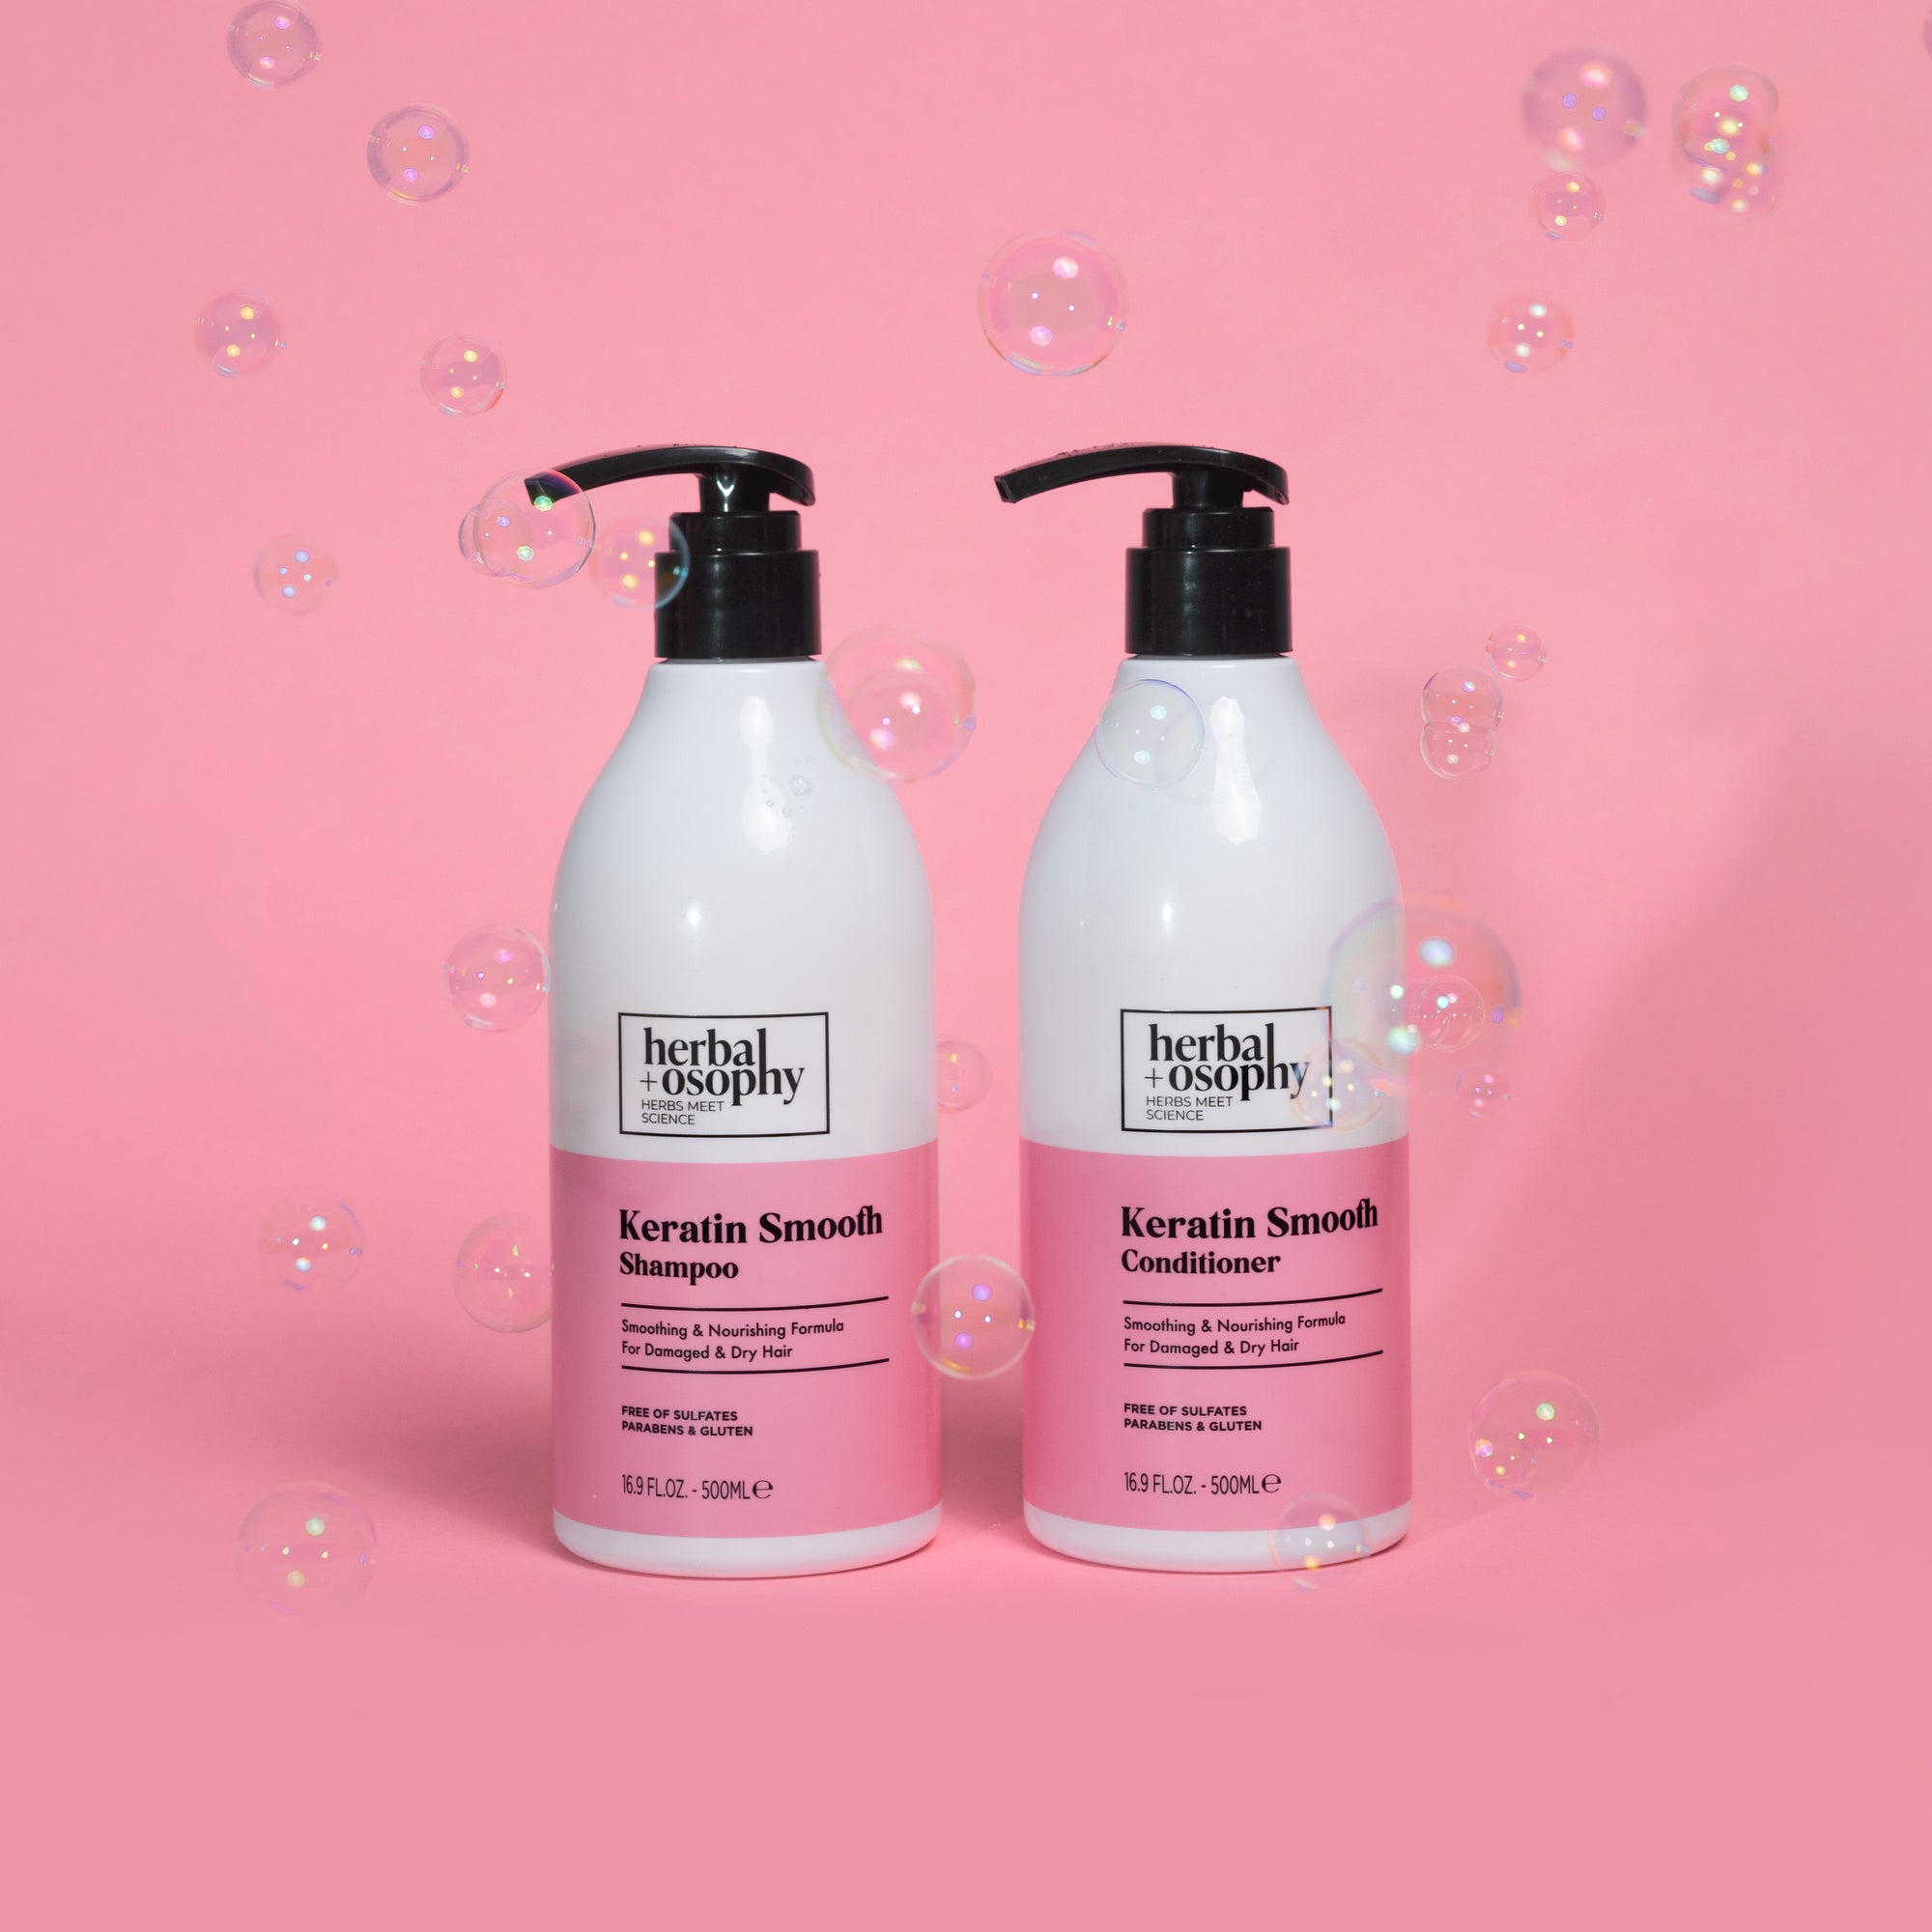 Herbalosophy Keratin Smooth Shampoo and Conditioner bottles on a pink background with bubbles floating around them